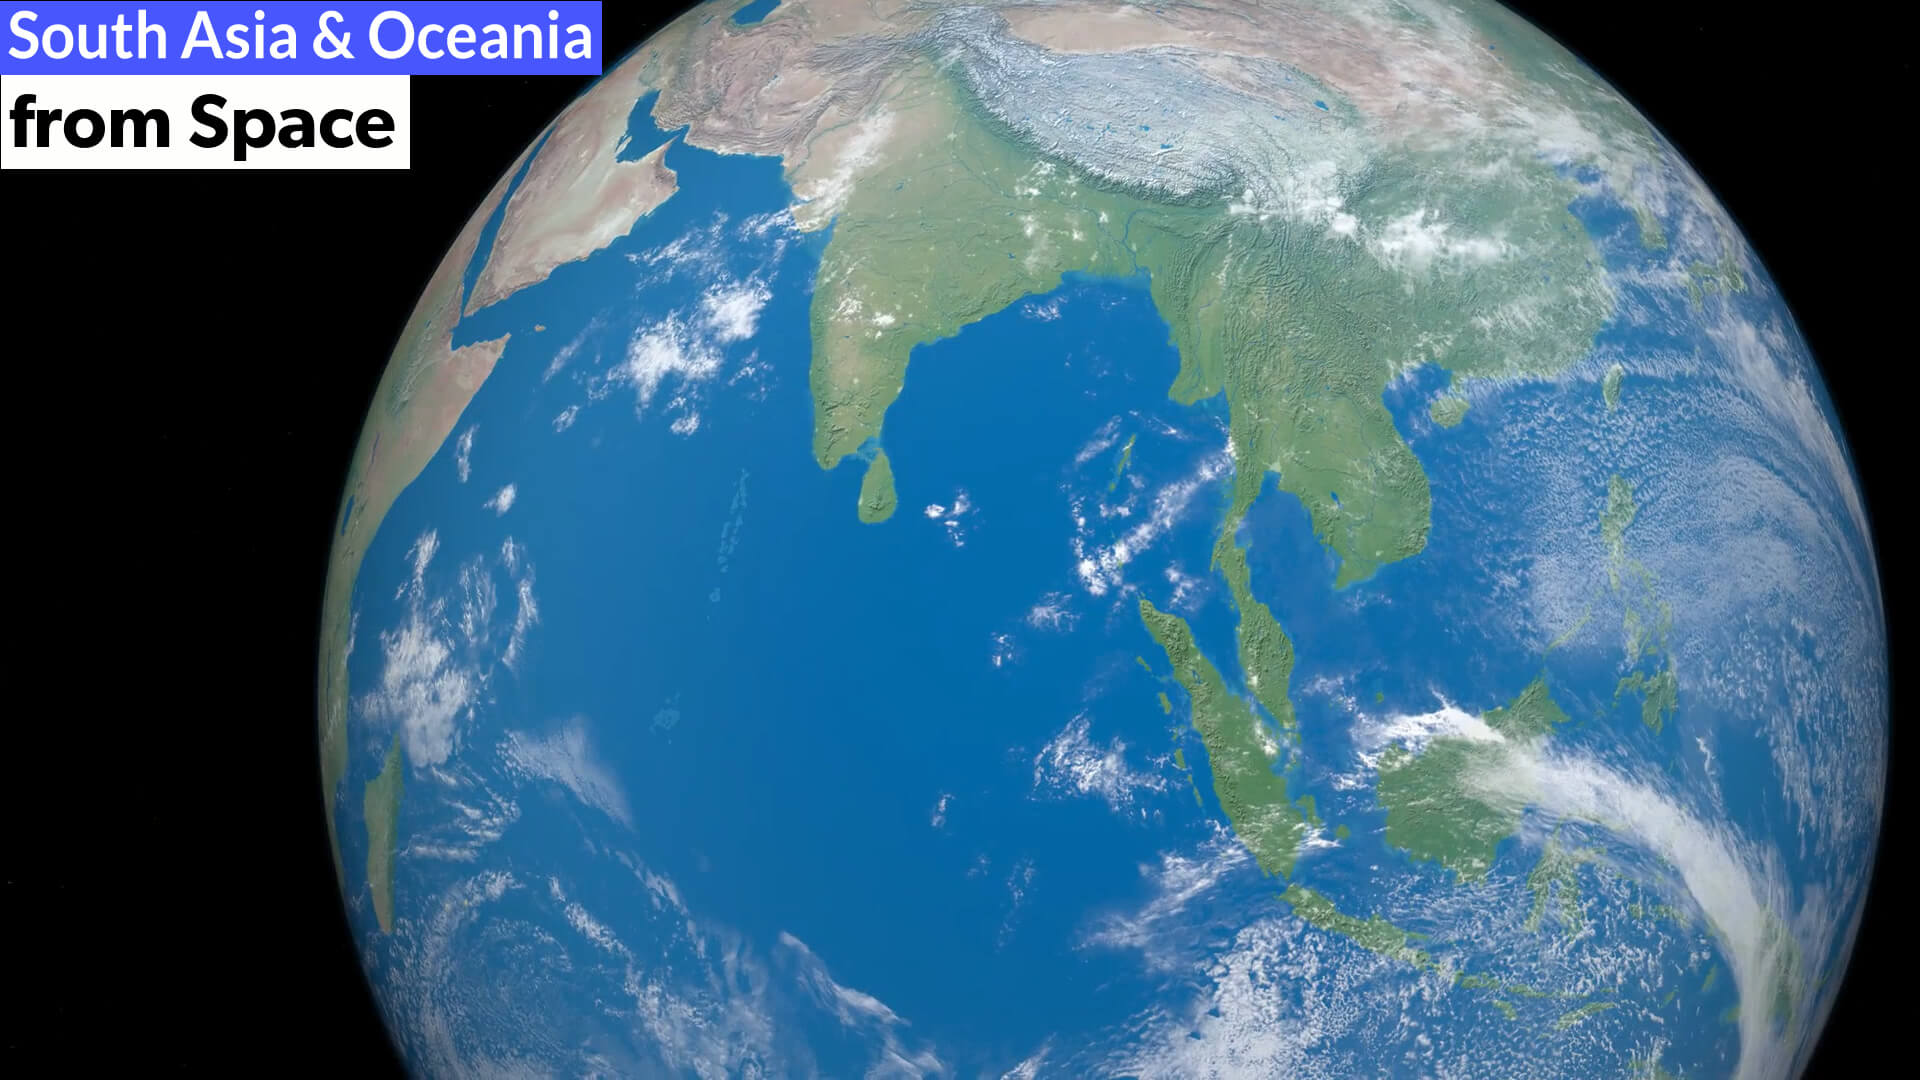 South Asia and Oceania from Space